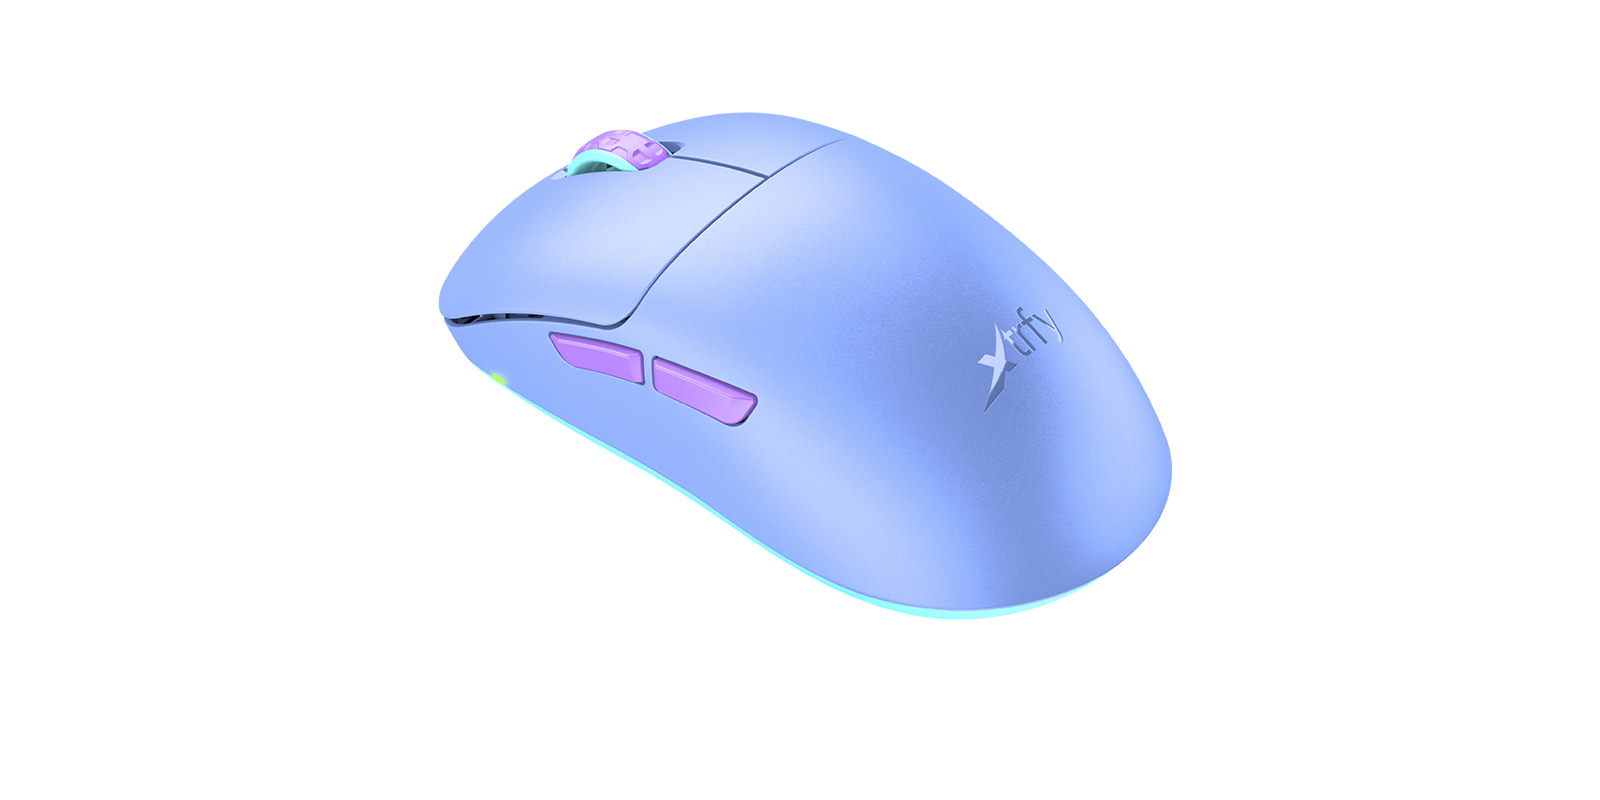 M8-Wireless-Frosty-Purple-Gaming-Mouse_Angle.jpg